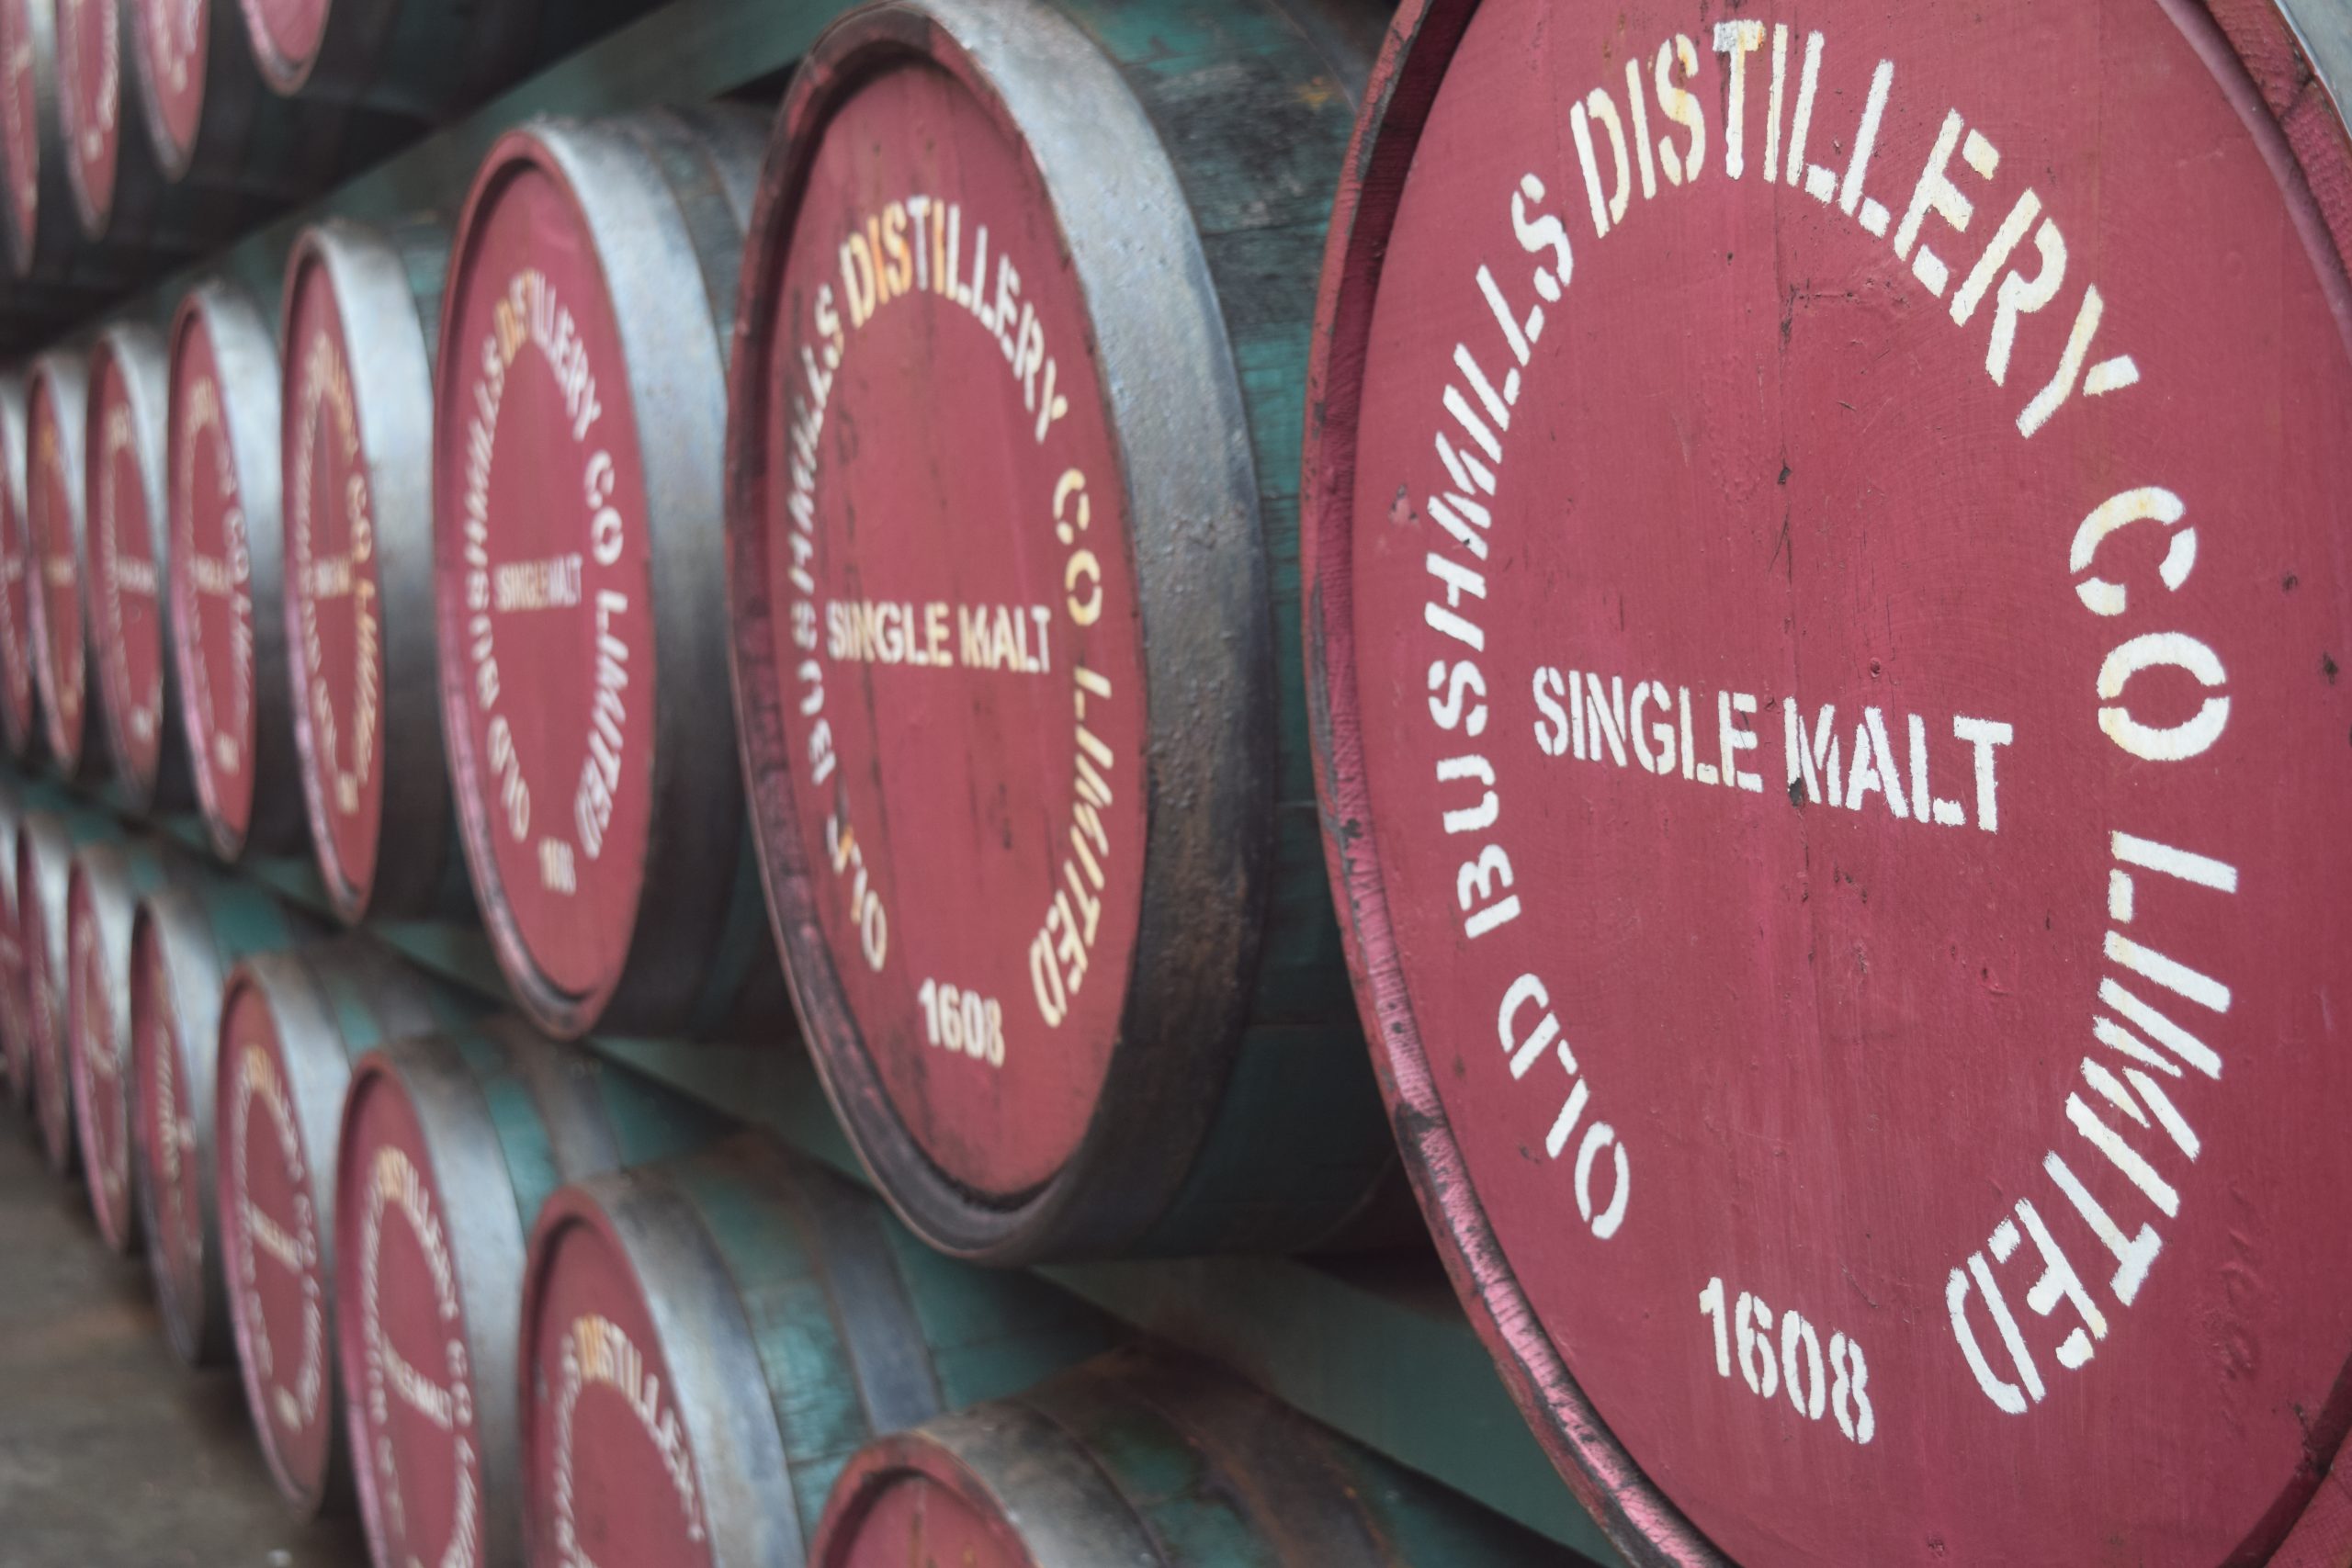 Bushmills sales drop in Covid-hit year, as stock levels rise